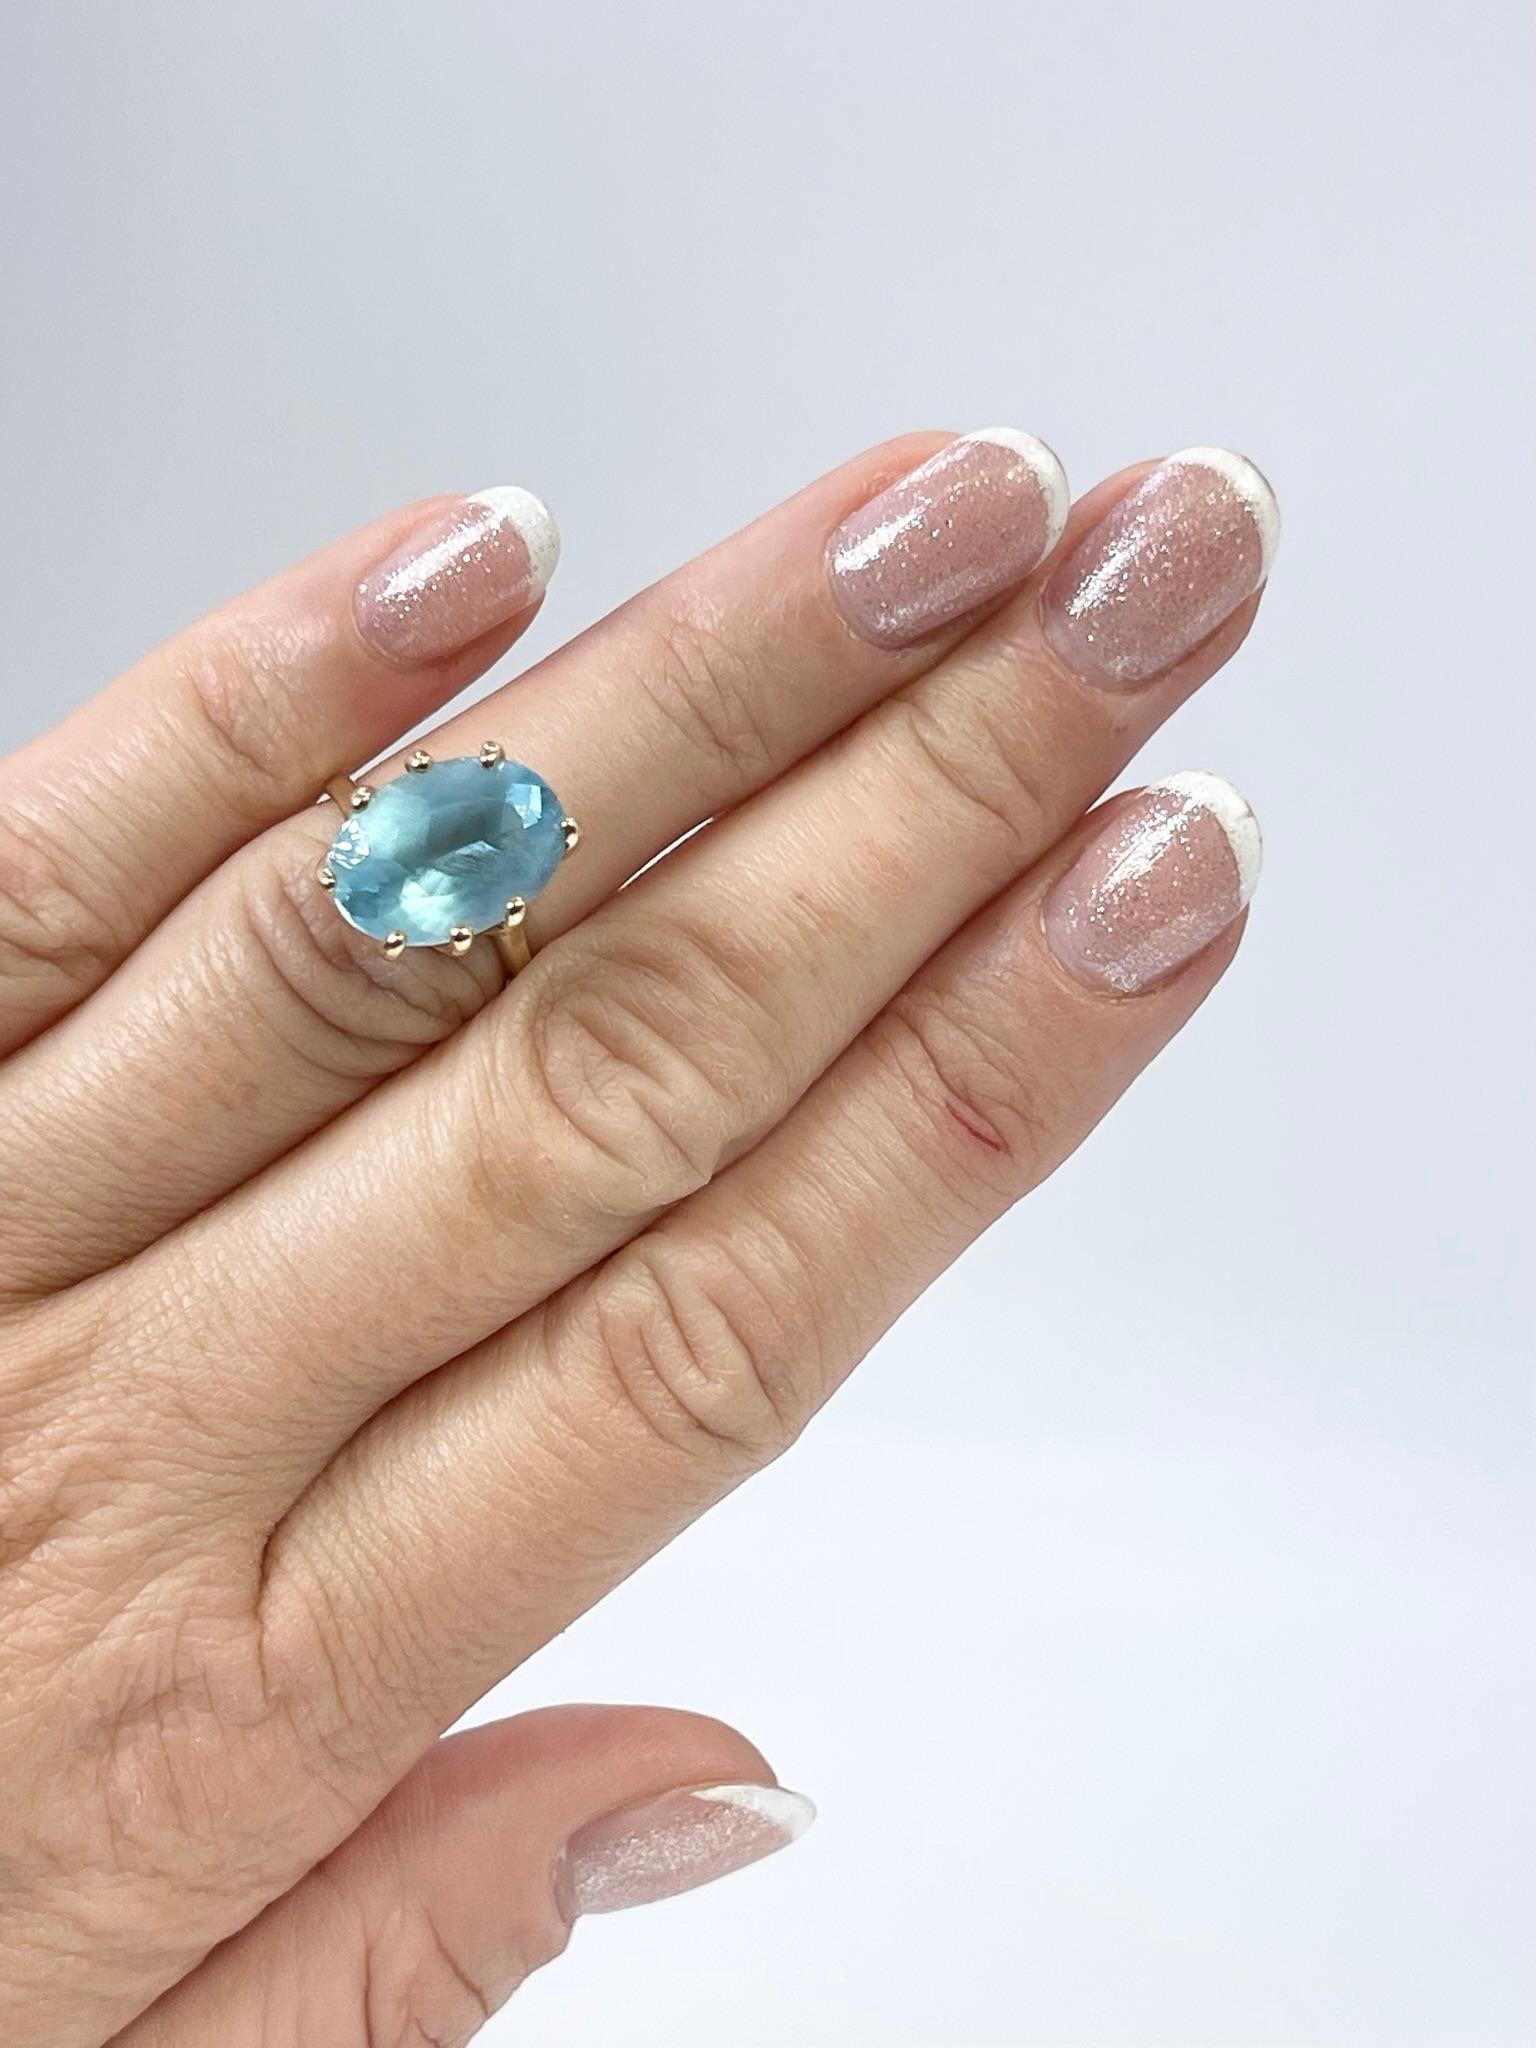 Blue Topaz ring Cocktail ring 14KT yellow gold  In Good Condition For Sale In Jupiter, FL